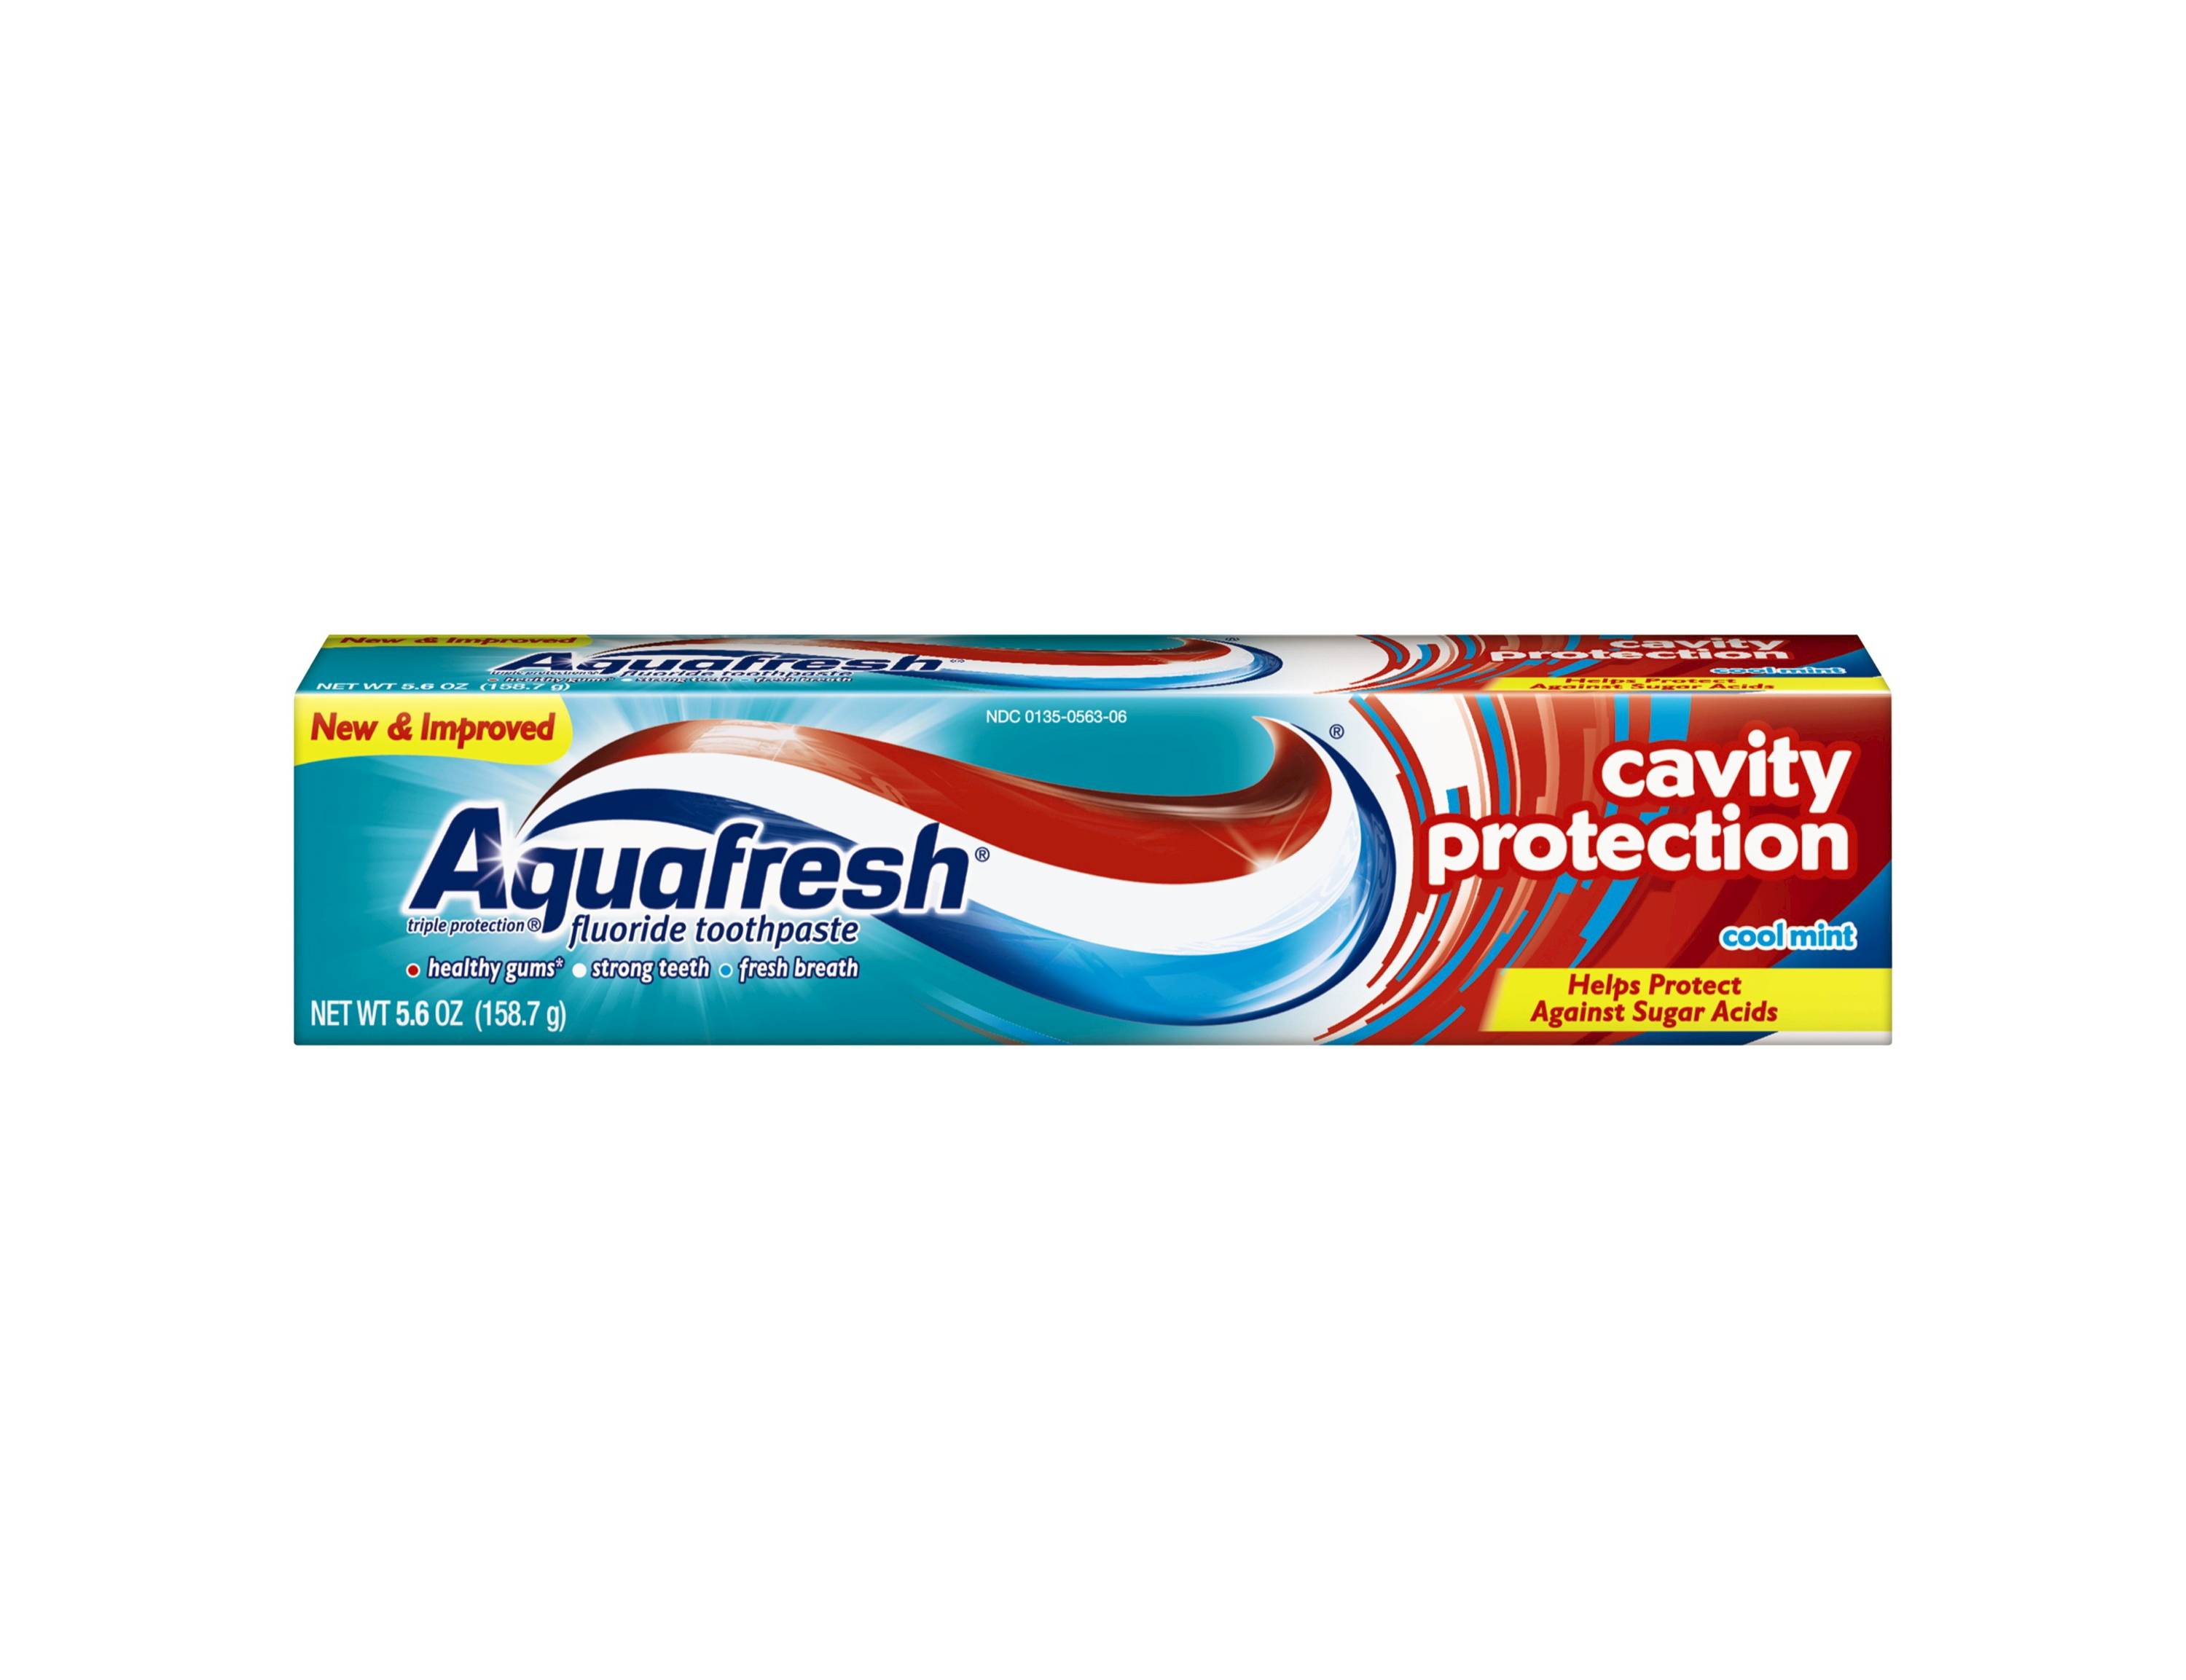 In-store: Aquafresh Triple Protection fluoride toothpaste for $1